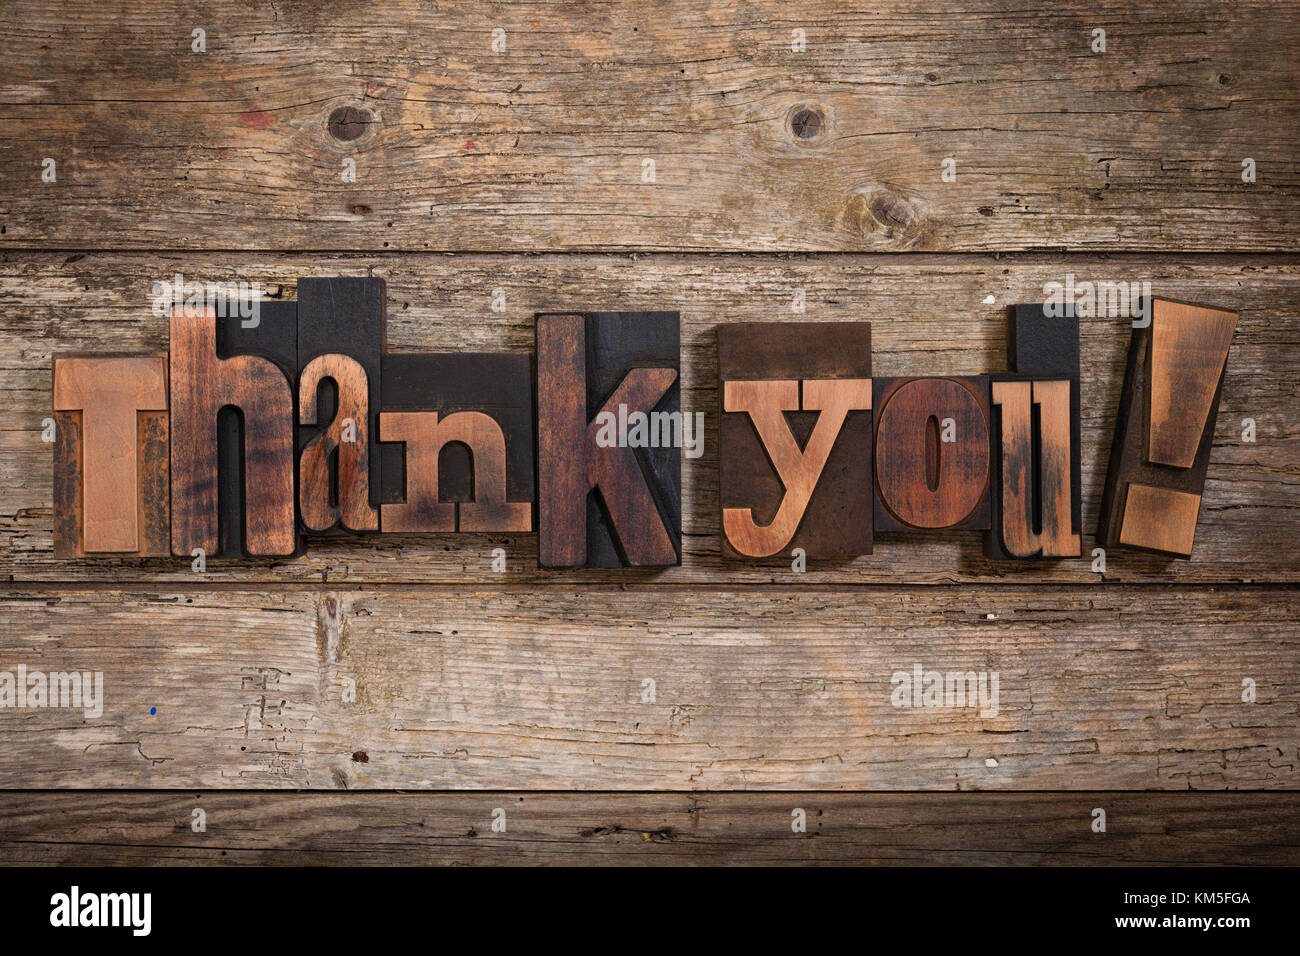 thank you, phrase set with vintage letterpress printing blocks on rustic wooden background Stock Photo